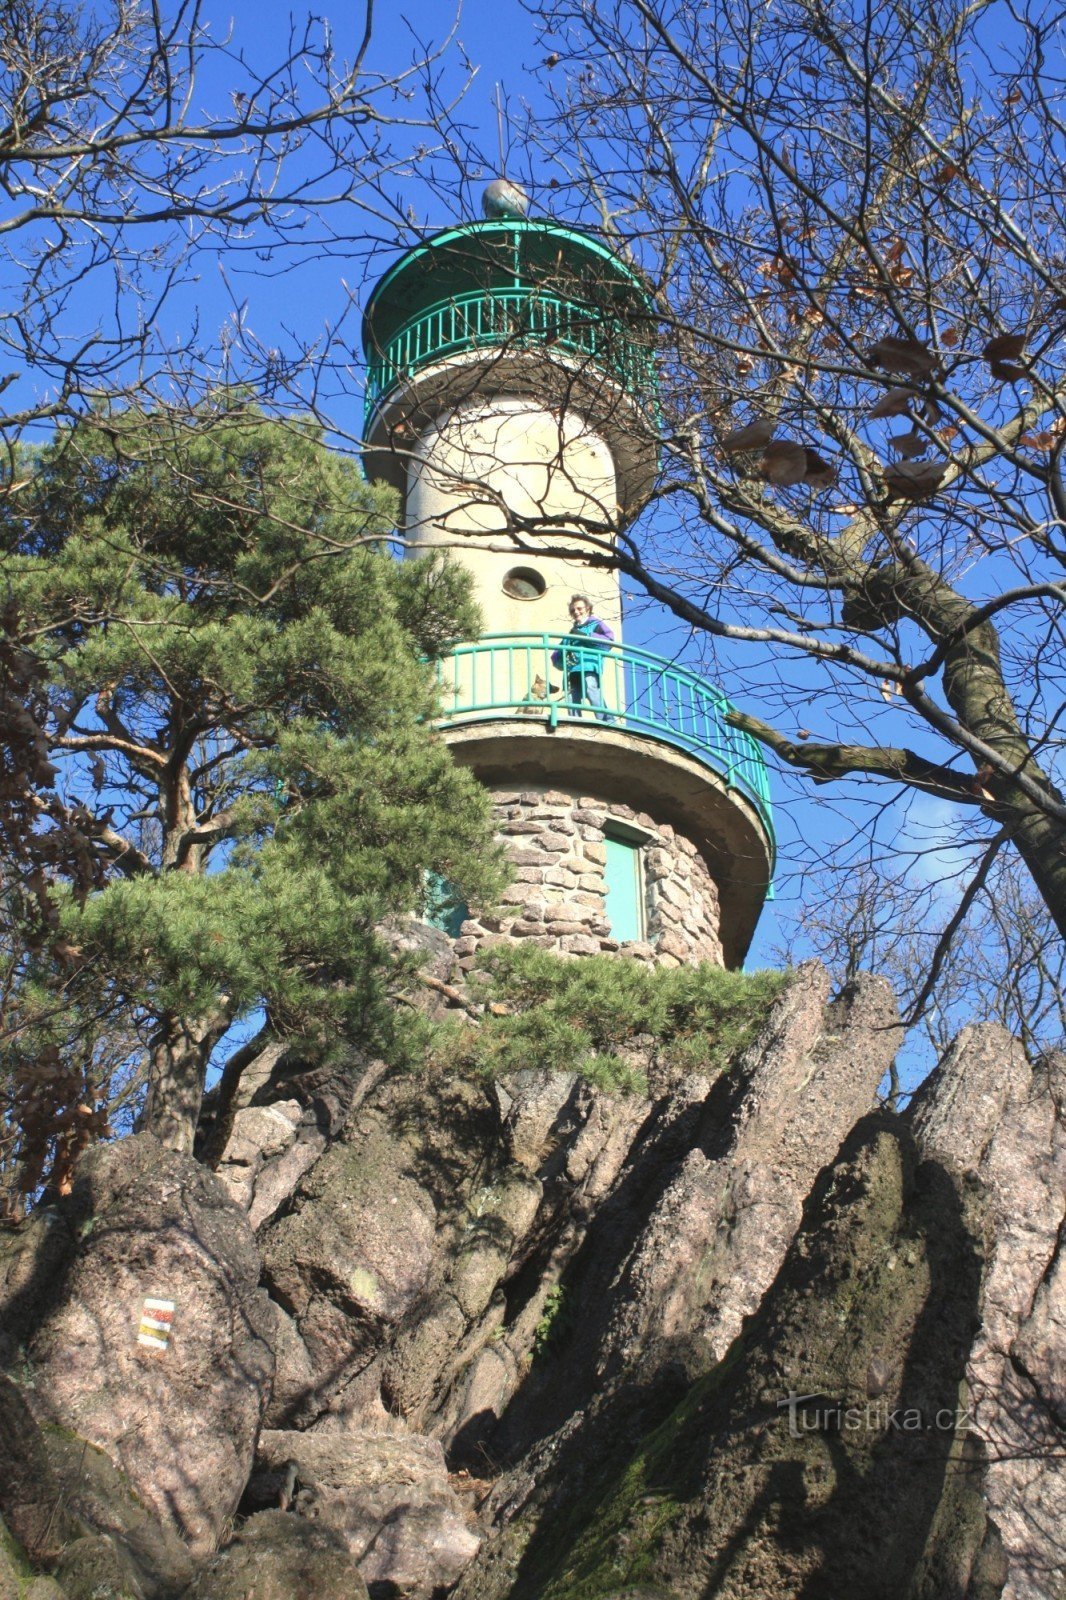 The observation tower is located on a rocky ridge